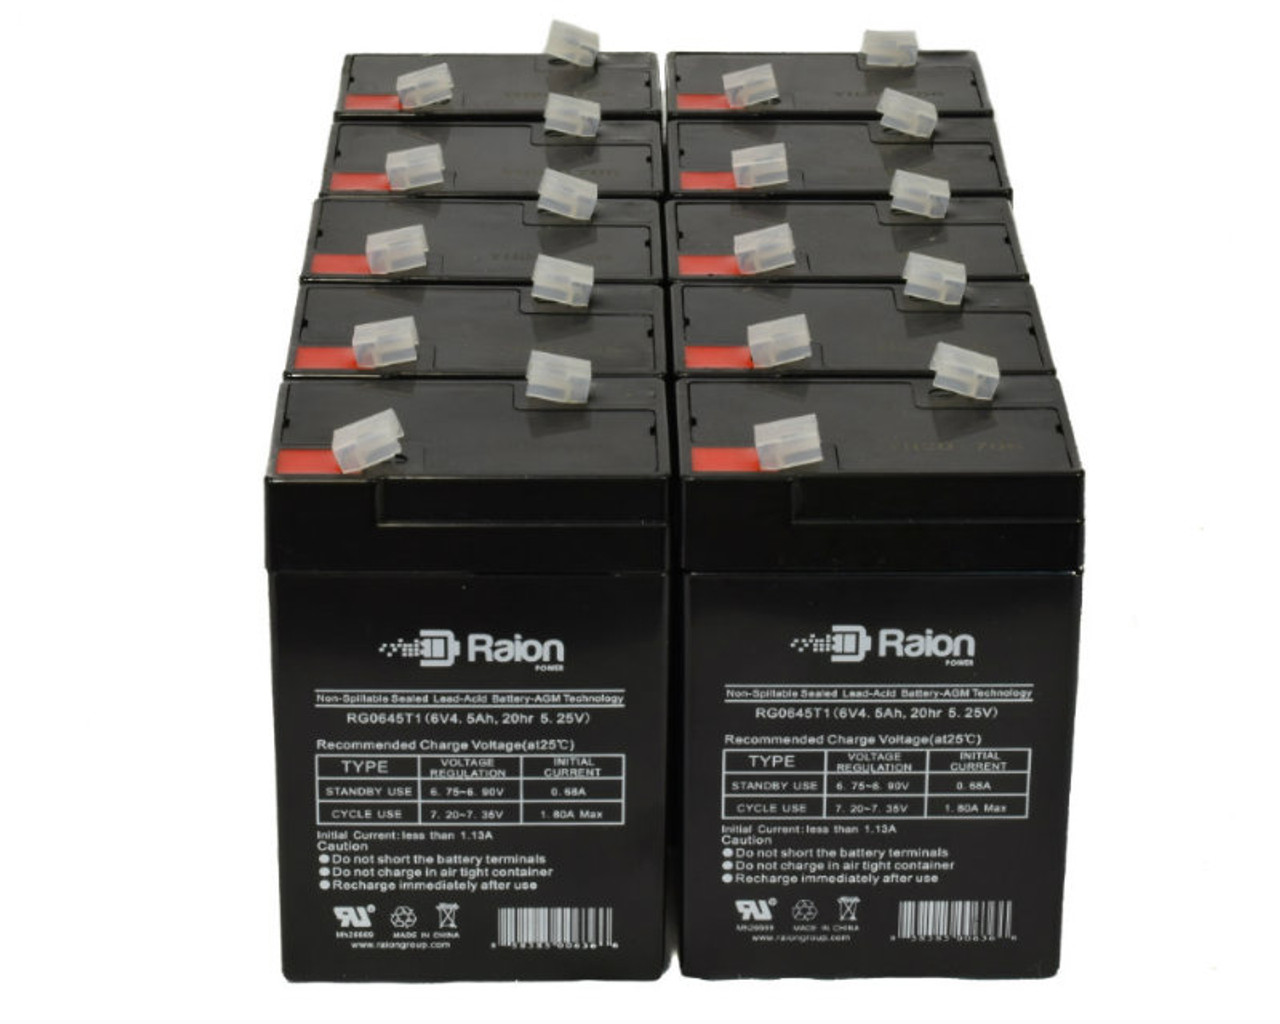 Raion Power 6 Volt 4.5Ah RG0645T1 Replacement Battery for SBB 3-FM-3.5 - 10 Pack